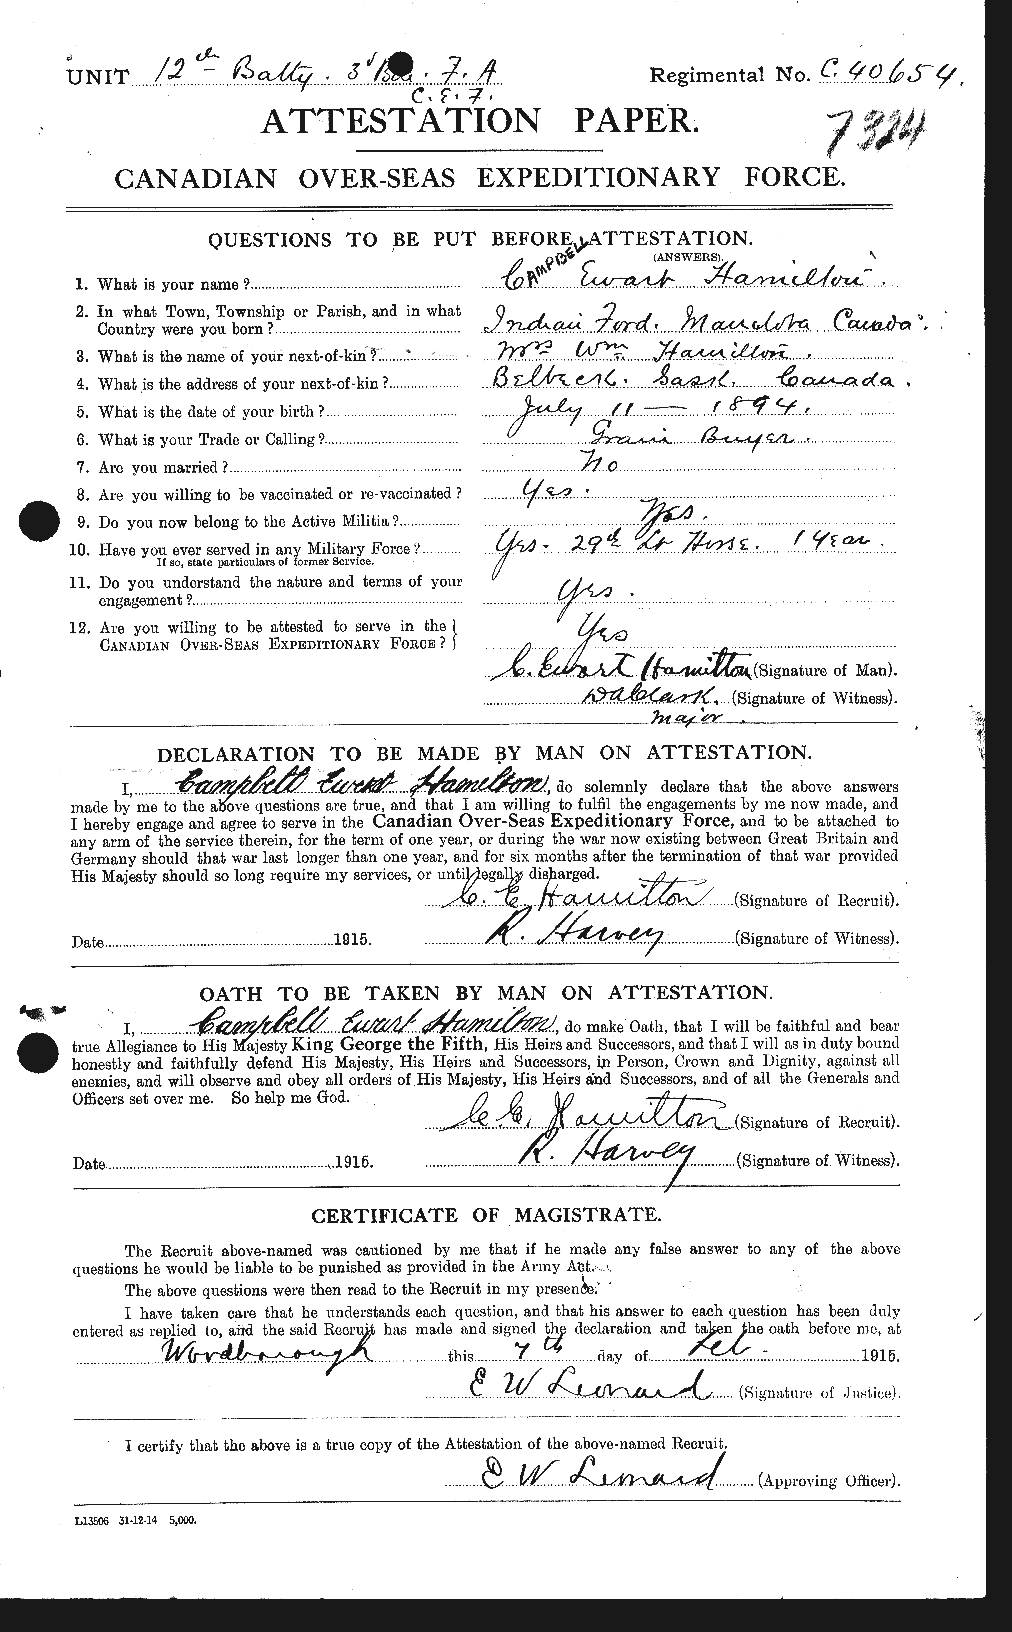 Personnel Records of the First World War - CEF 375280a